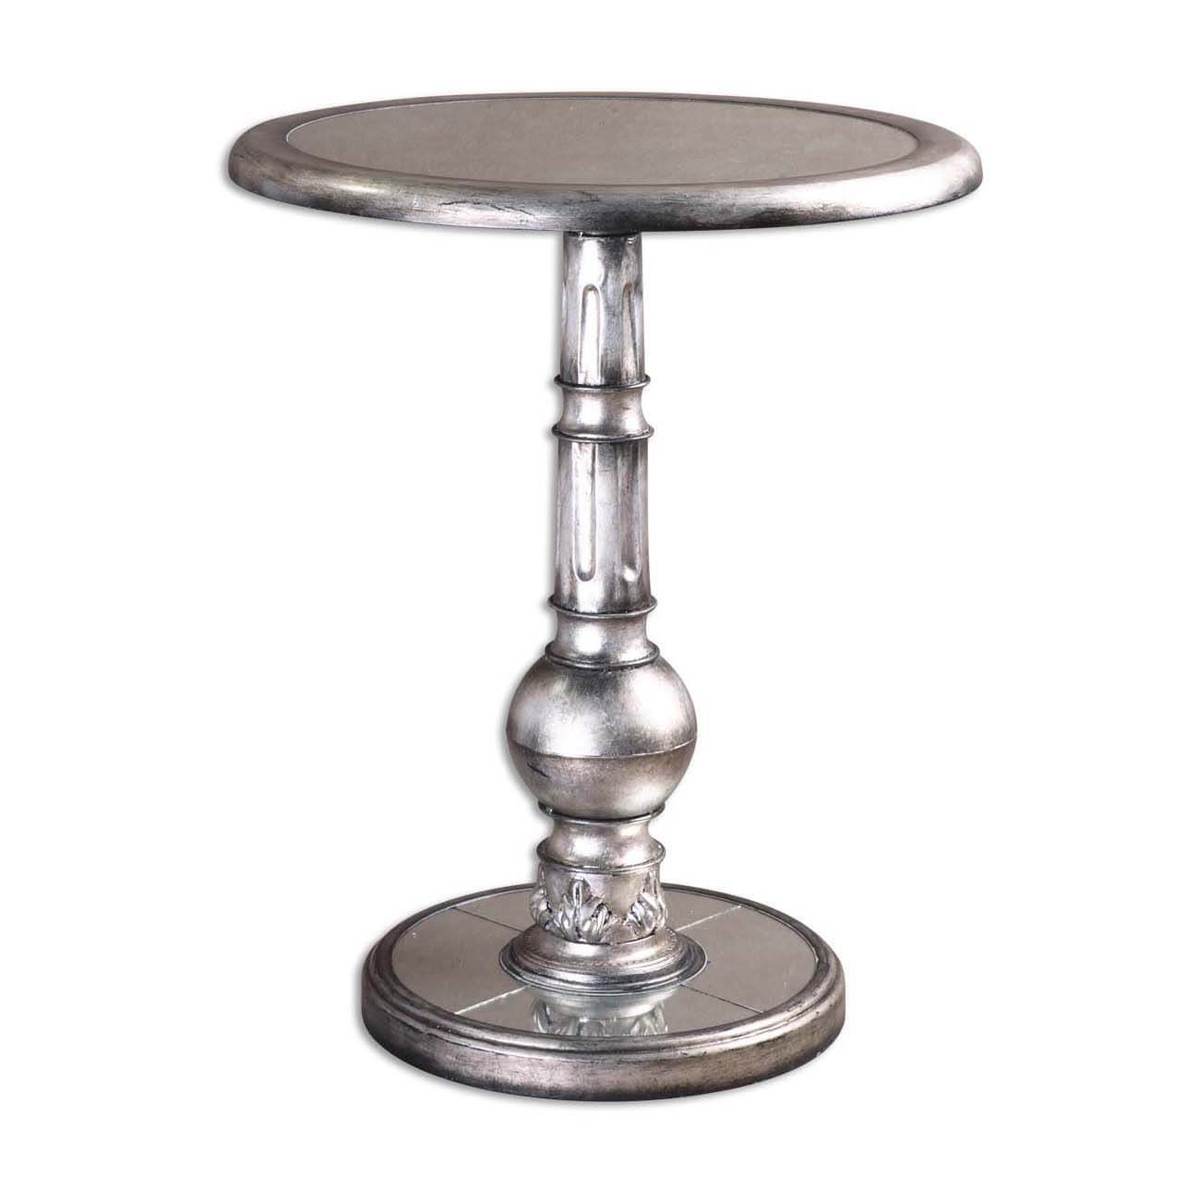 uttermost baina silver accent table modtempo tilt umbrella with stand black marble top end tables bedroom side commercial office furniture pottery barn style target pink lamp